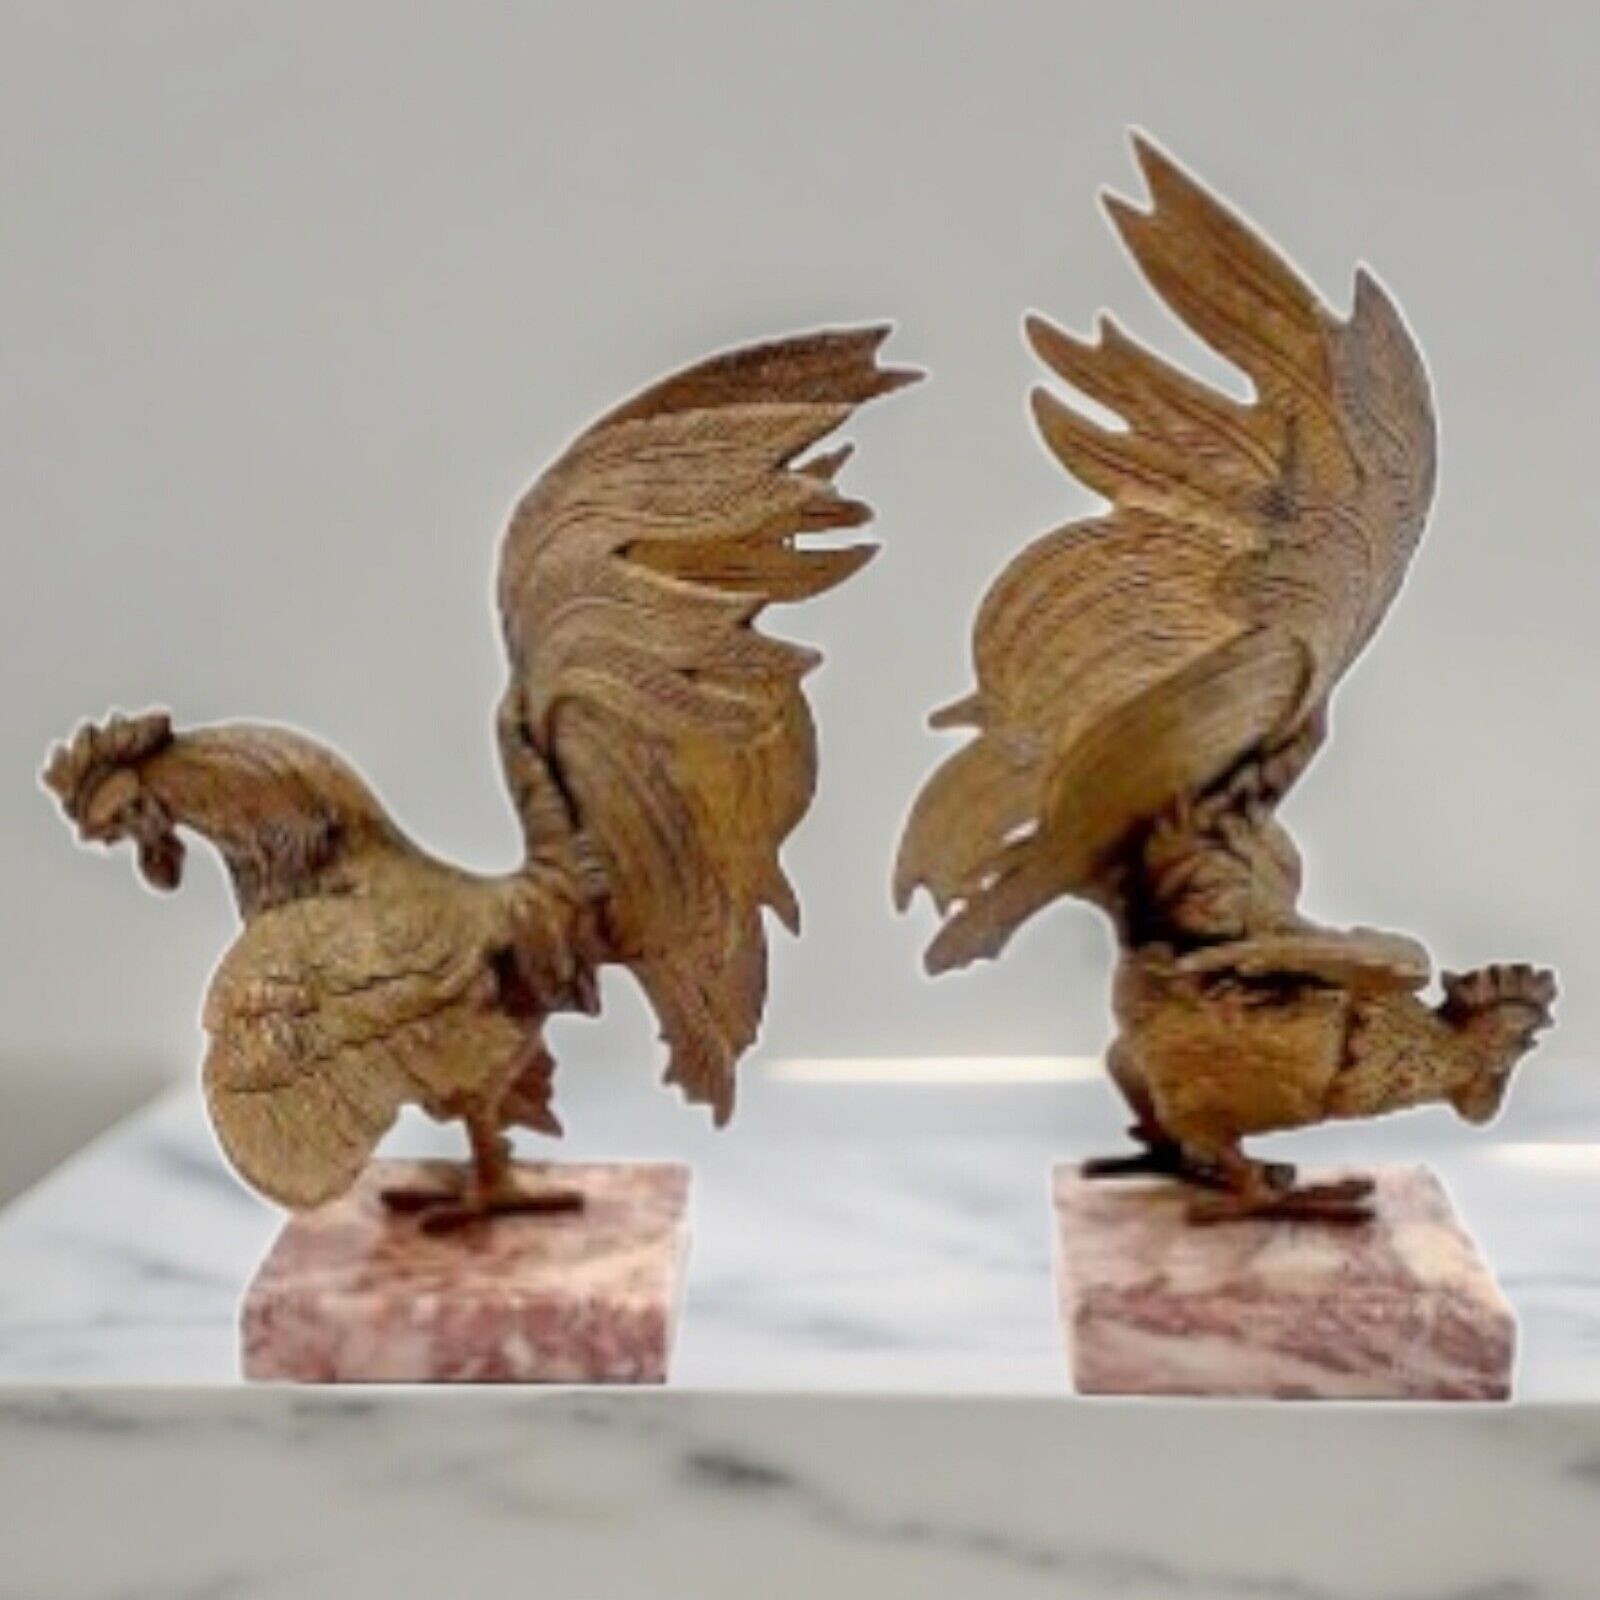 Set of Brass Fighting Roosters Bookends w/ Onyx Stone Base Vintage 8.5